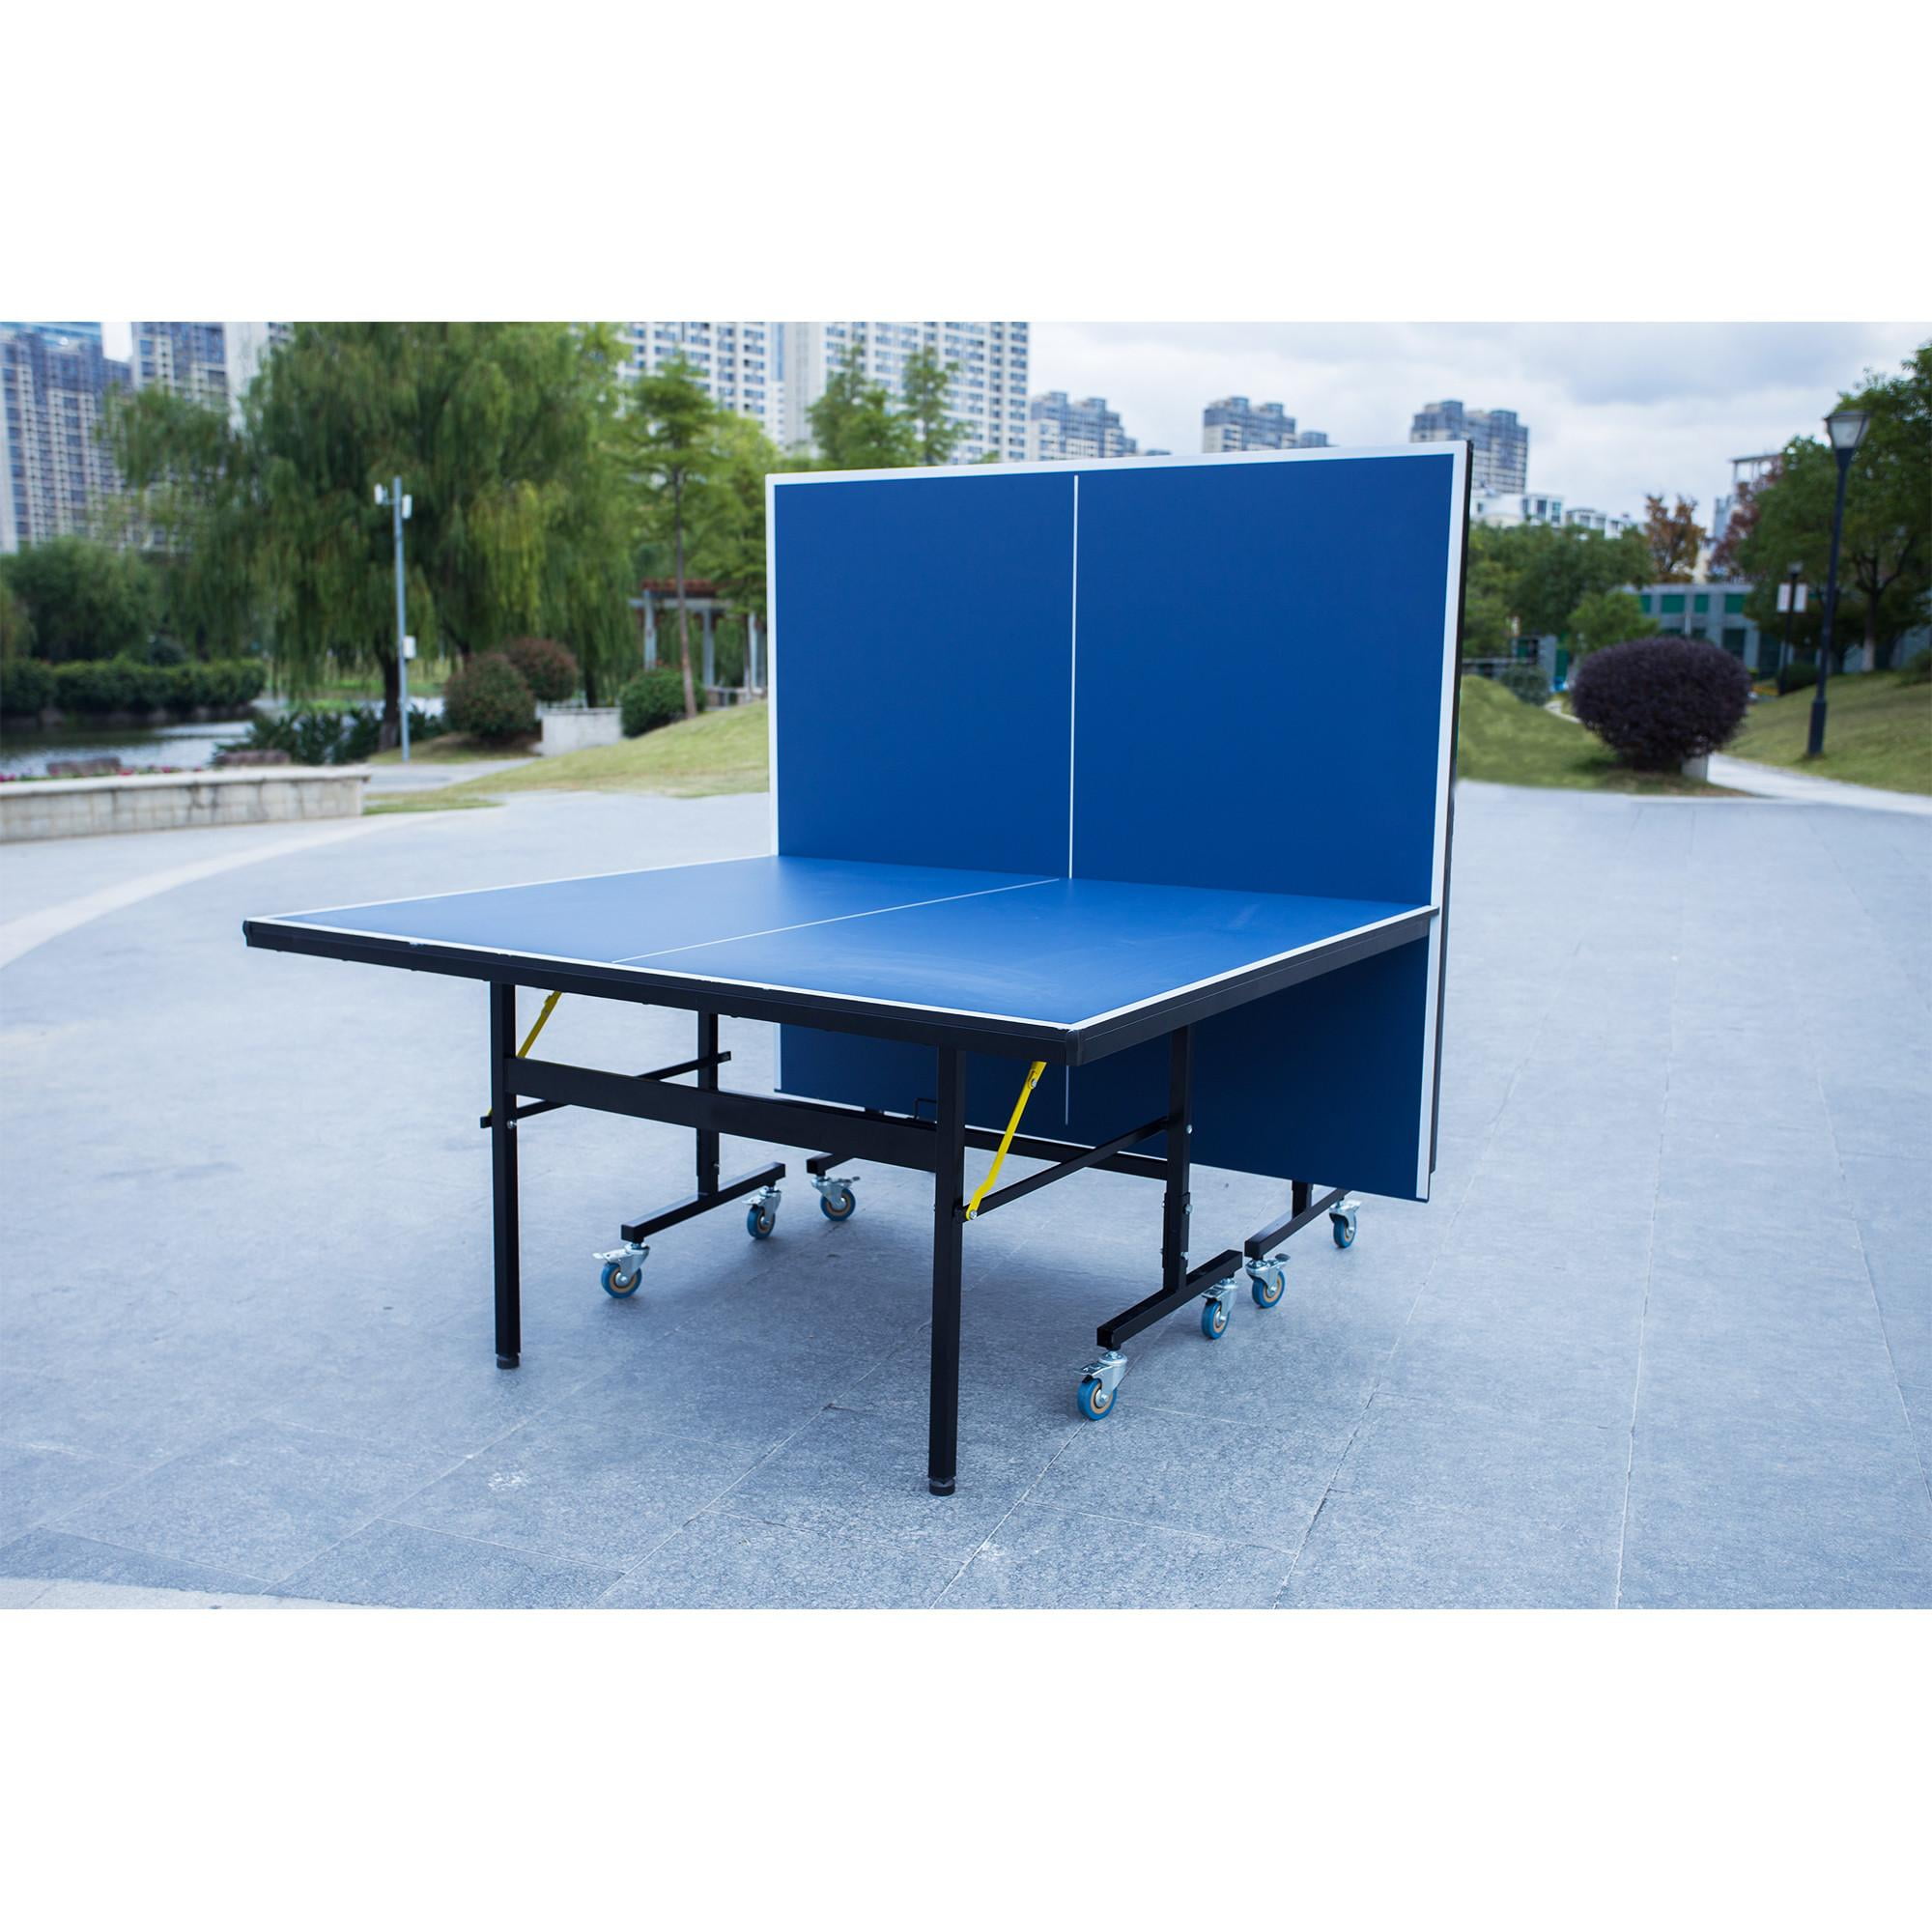 IDEALHOUSE Portable Table Tennis Table, Mid-Size Ping Pong Table for Indoor  Outdoor Foldable Table Tennis Table with Net, Blue, No Assembly Required